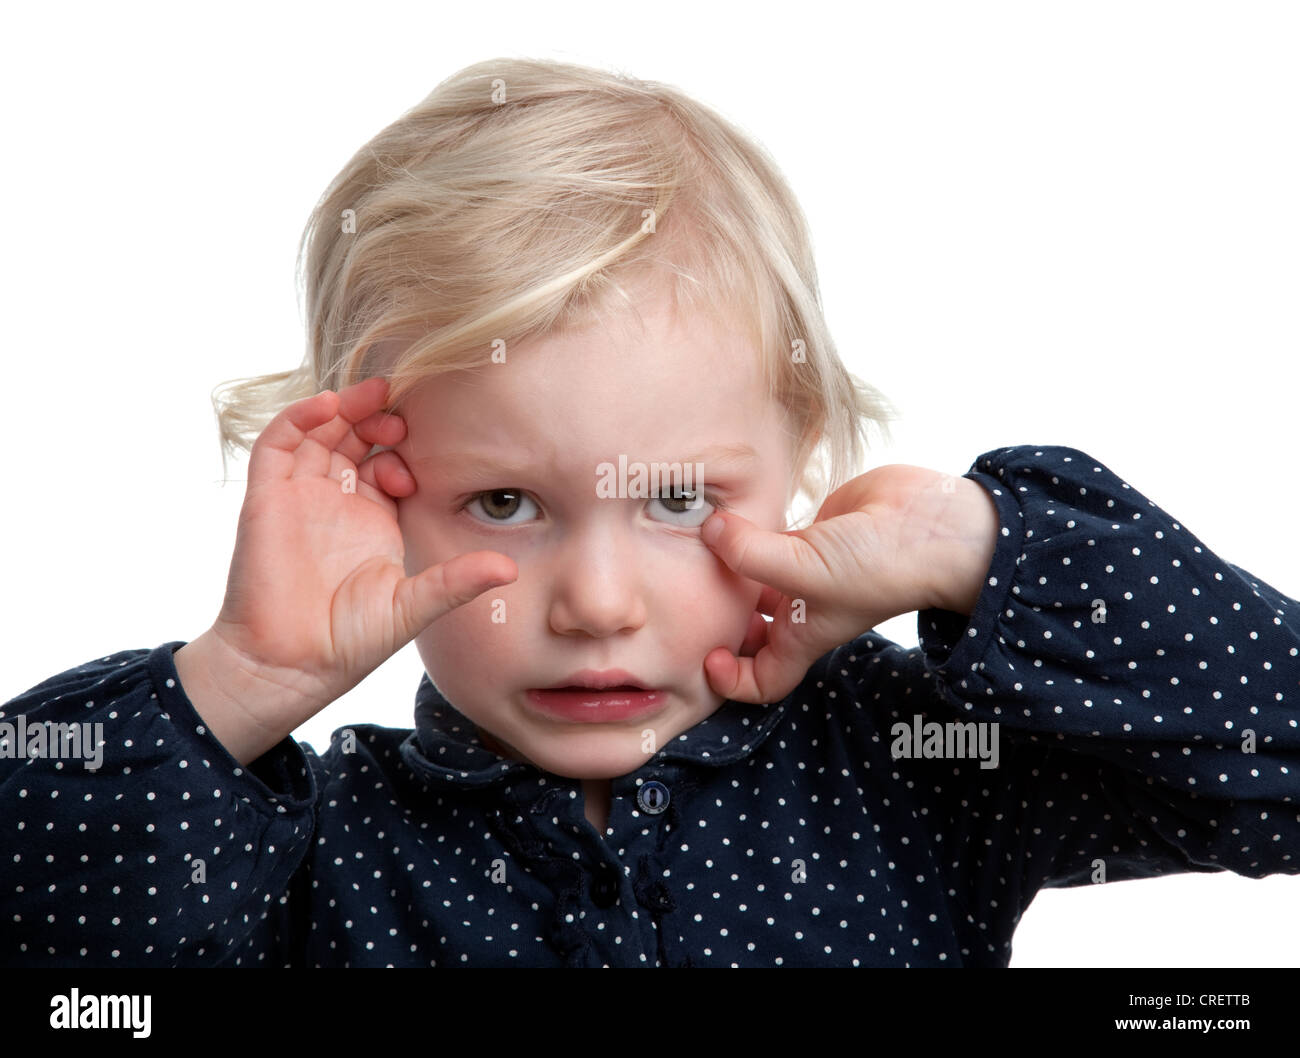 A 'Terrible Twos' shot of a moody irritable  2-3 year old girl Stock Photo